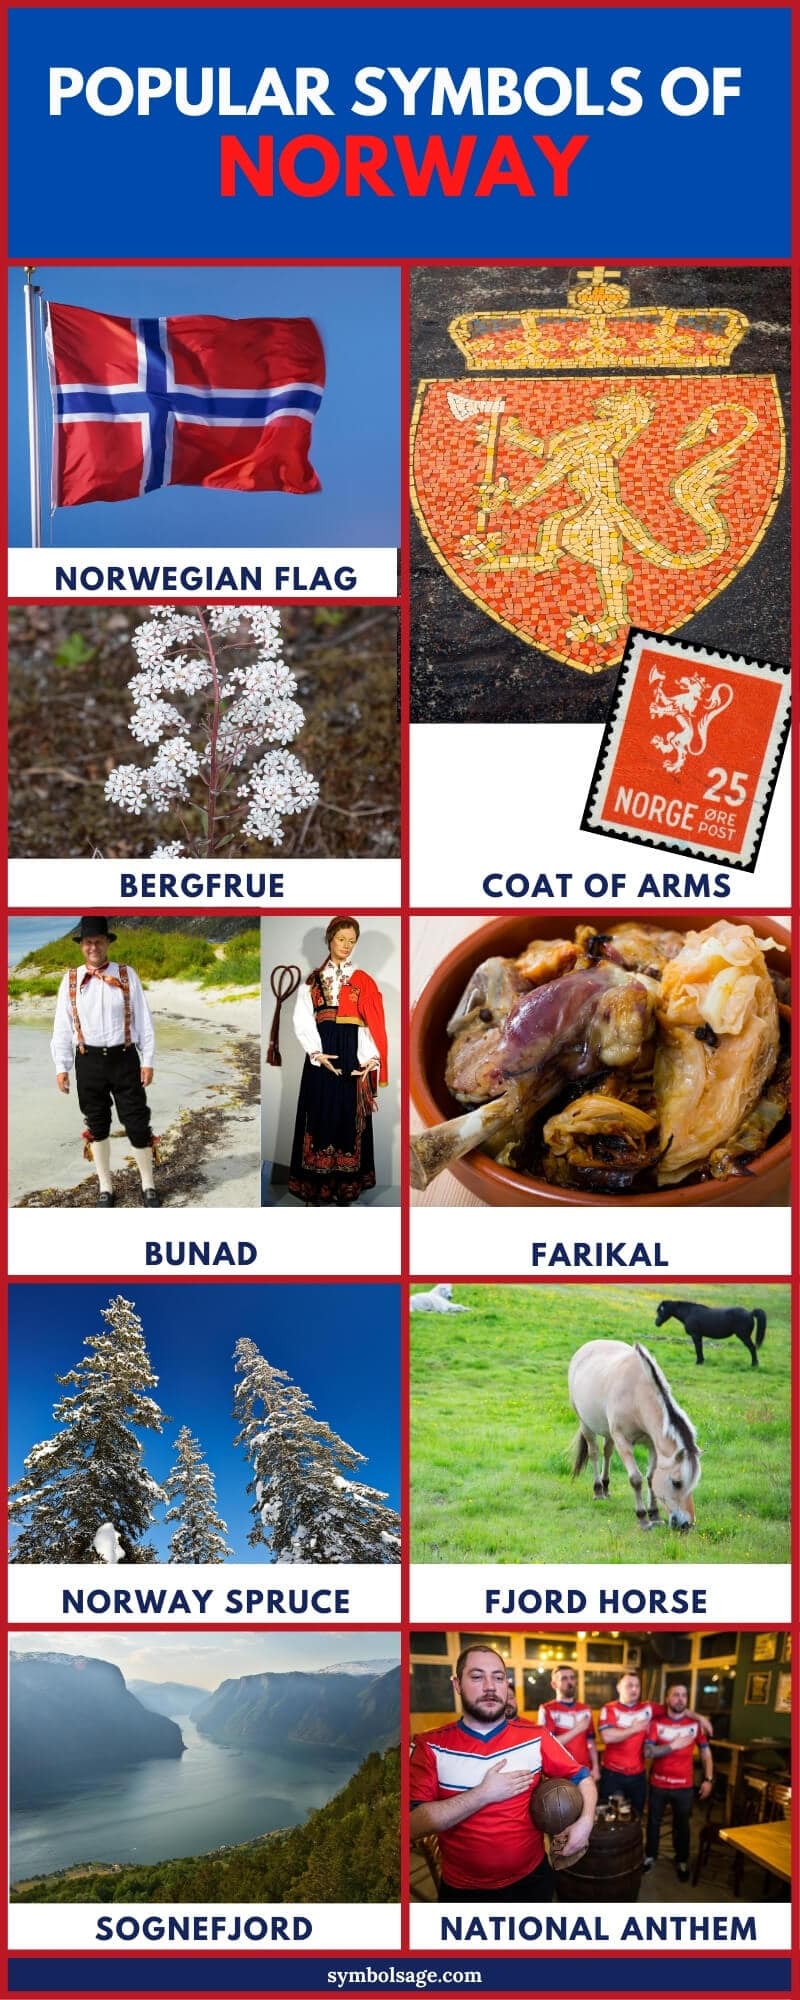 Symbols of Norway (with Images) - Symbol Sage